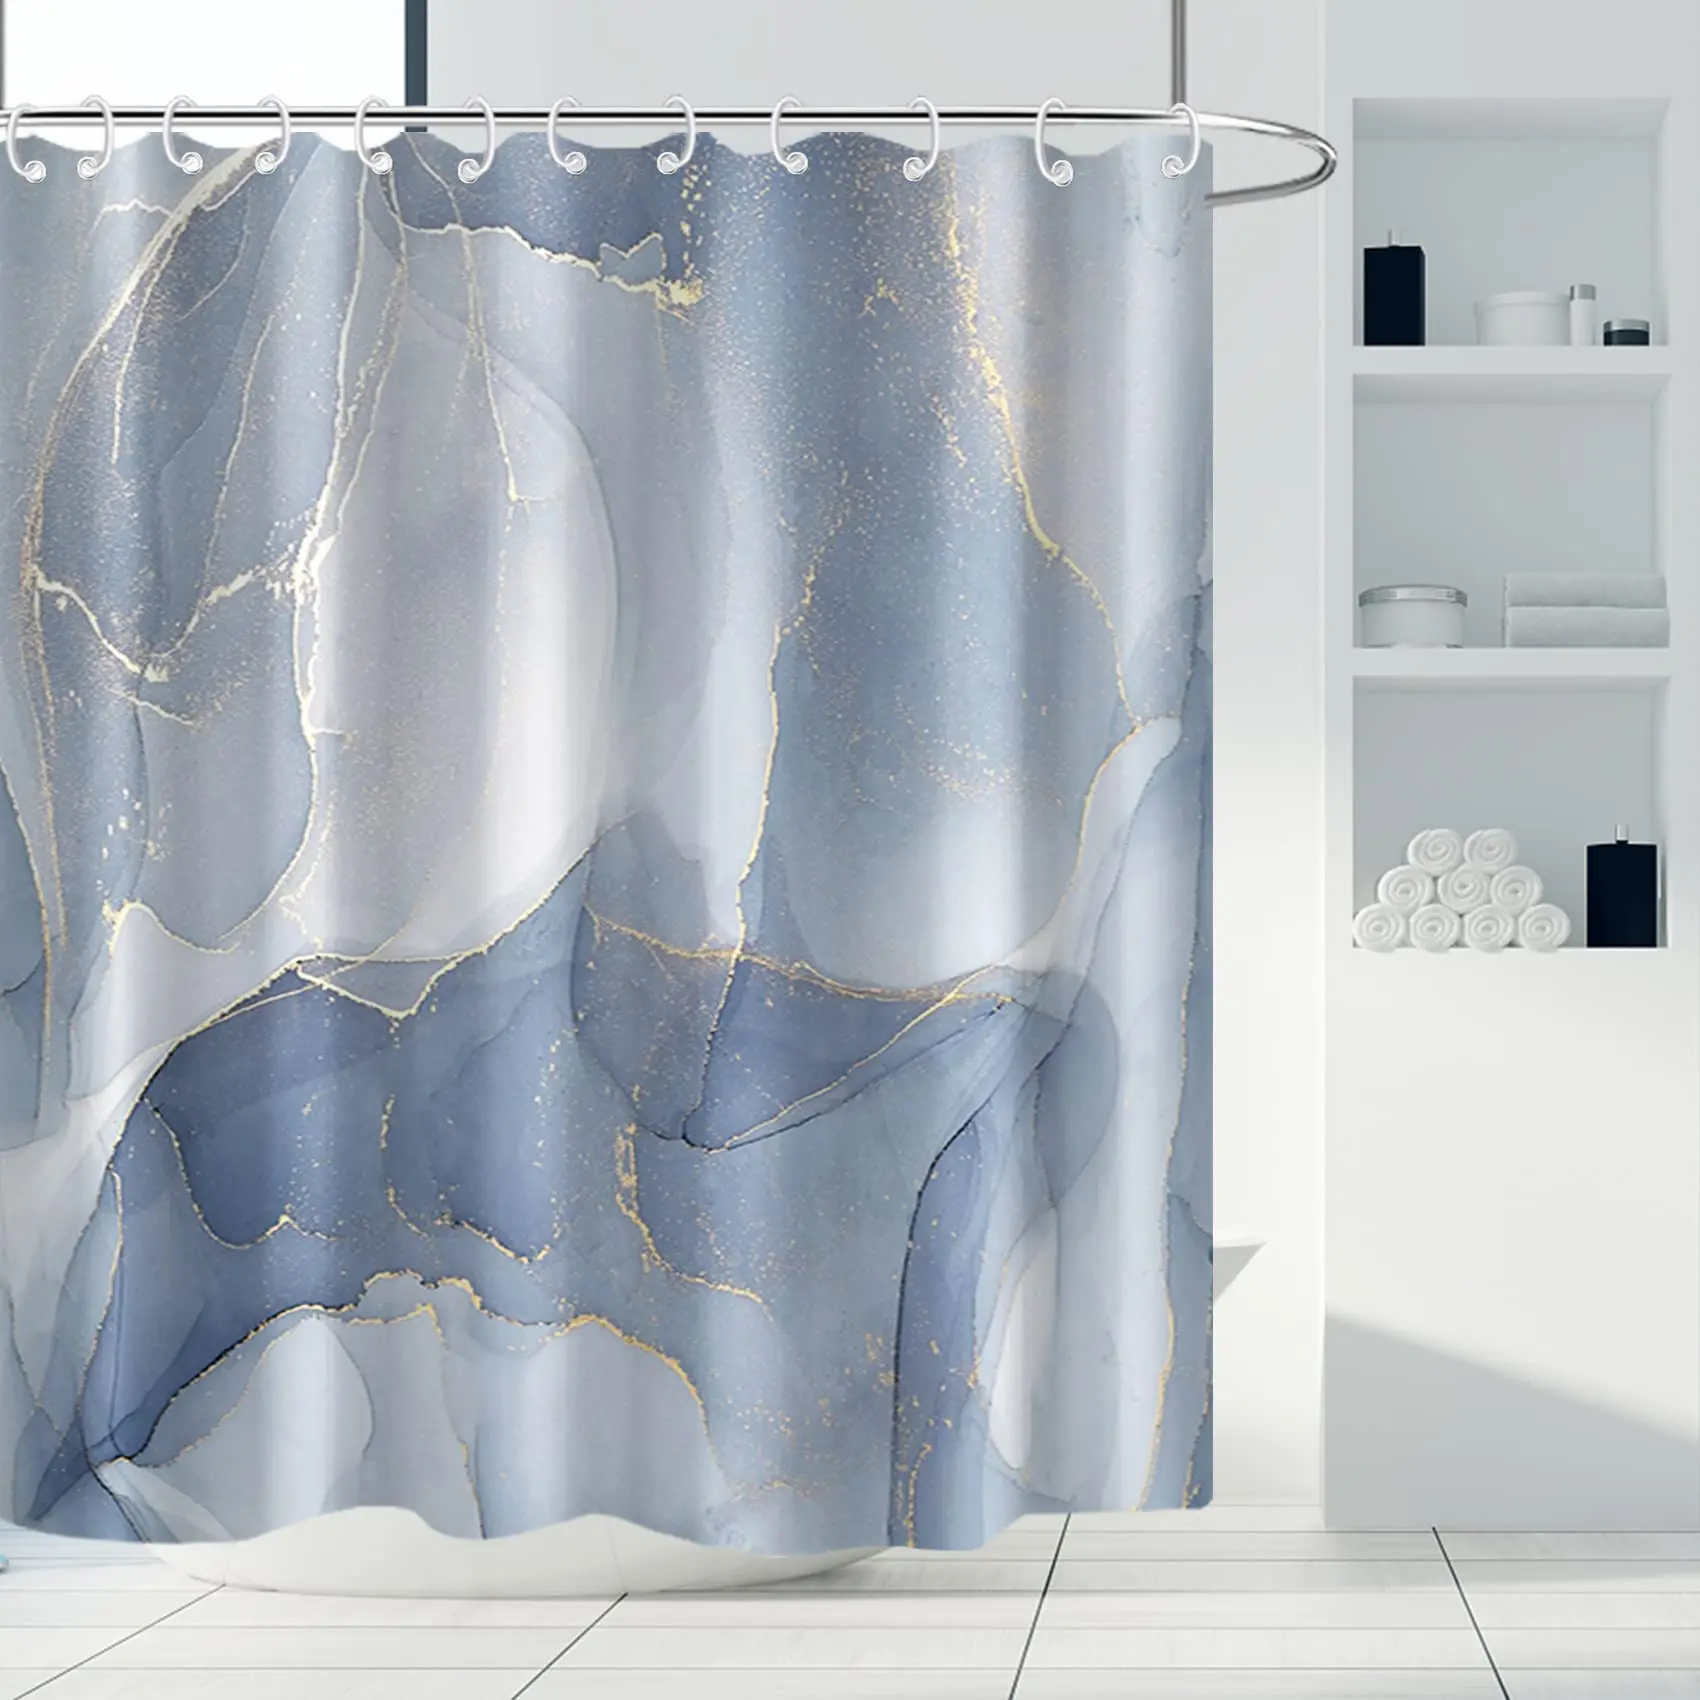 Blue Marble Shower Curtain Waterproof Abstract Shower Curtains for Bathroom Decor Printed Washable Bathtub Curtain with Hooks